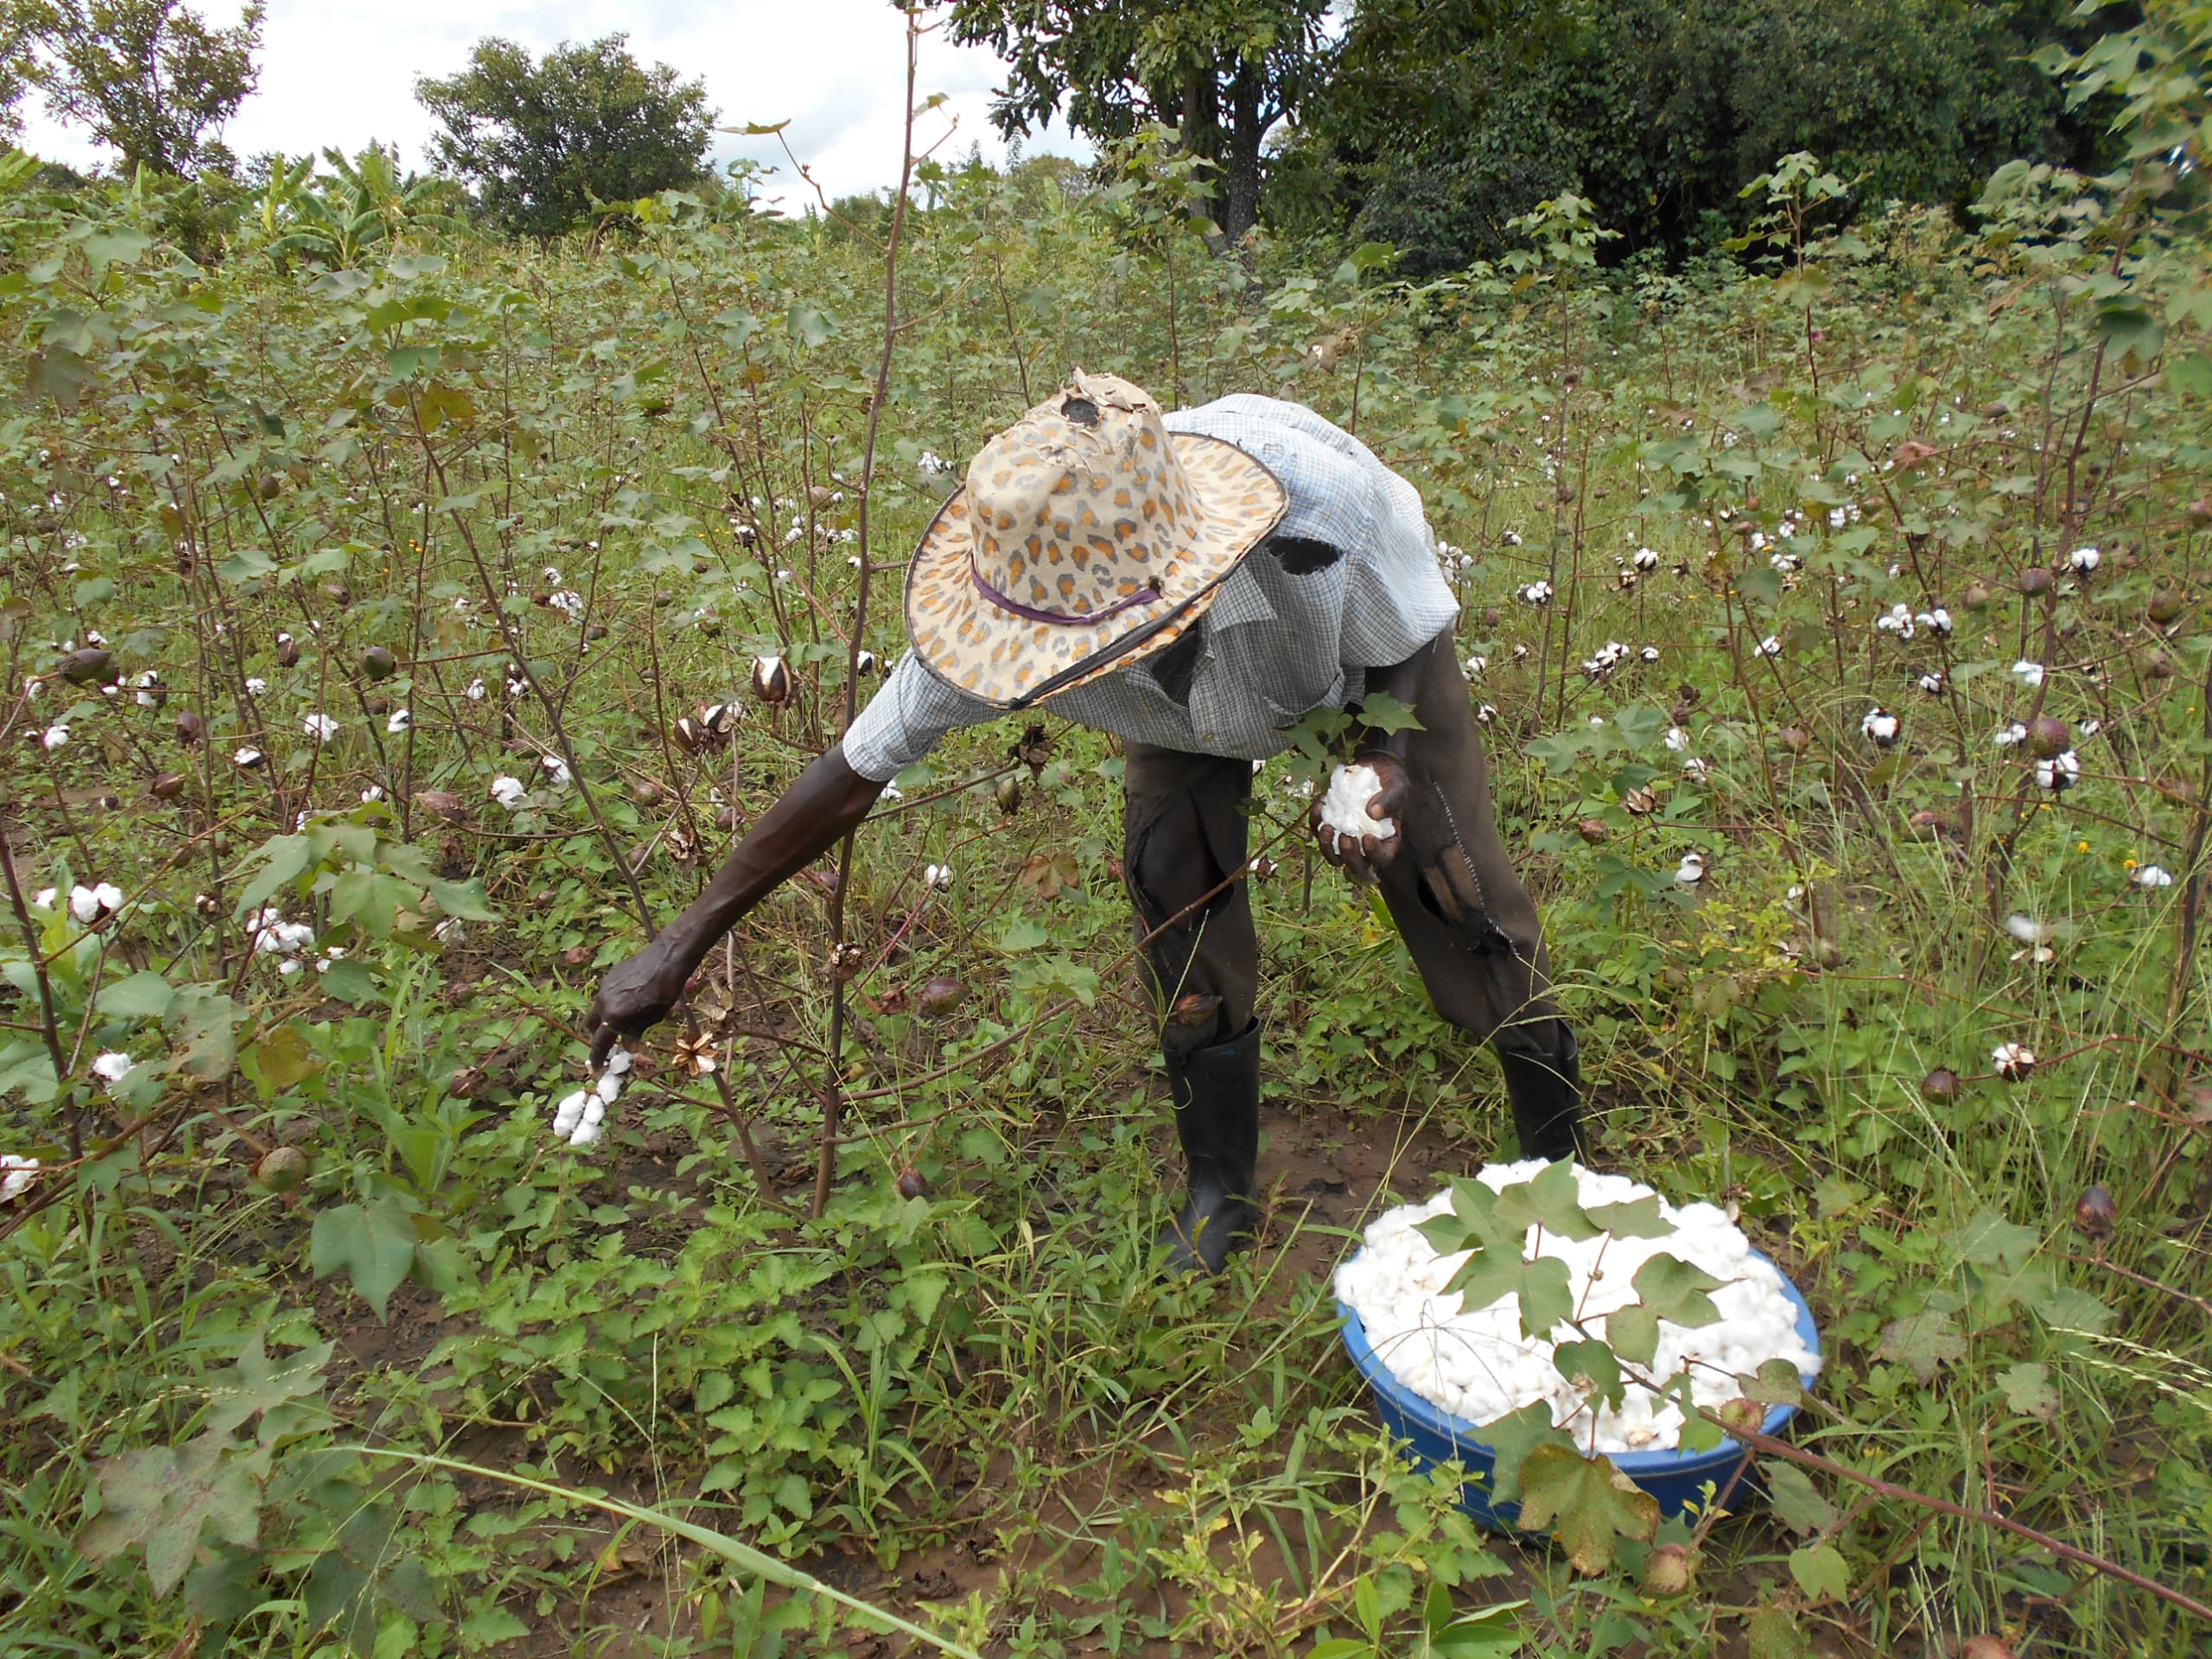 Budget cuts for agriculture sector worry CSOs